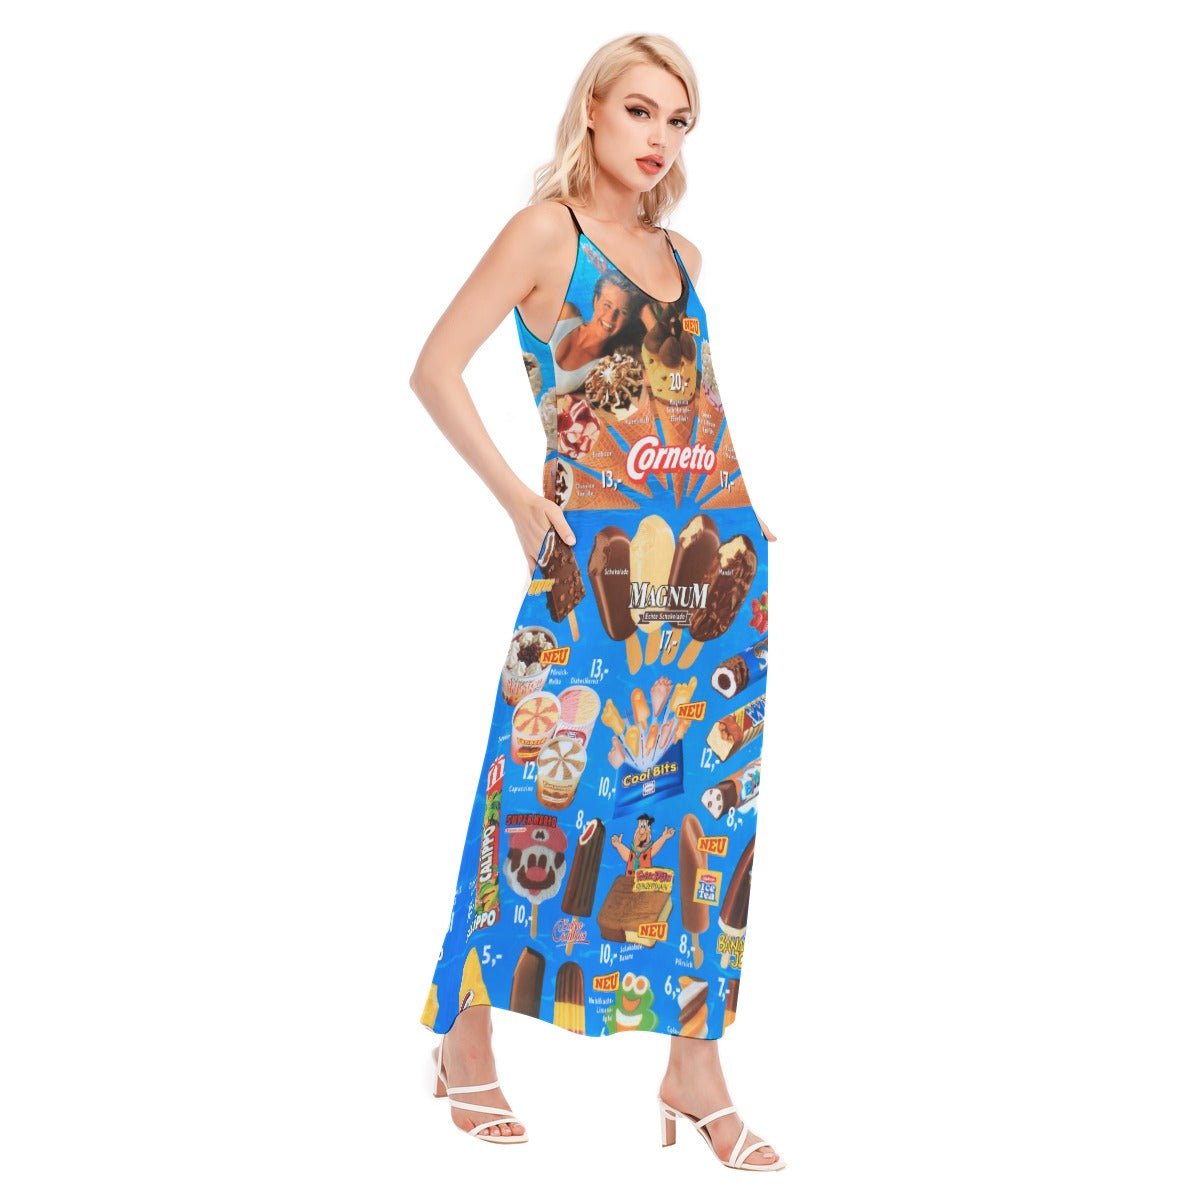 Perfect dress for tropical vacations and summer outings